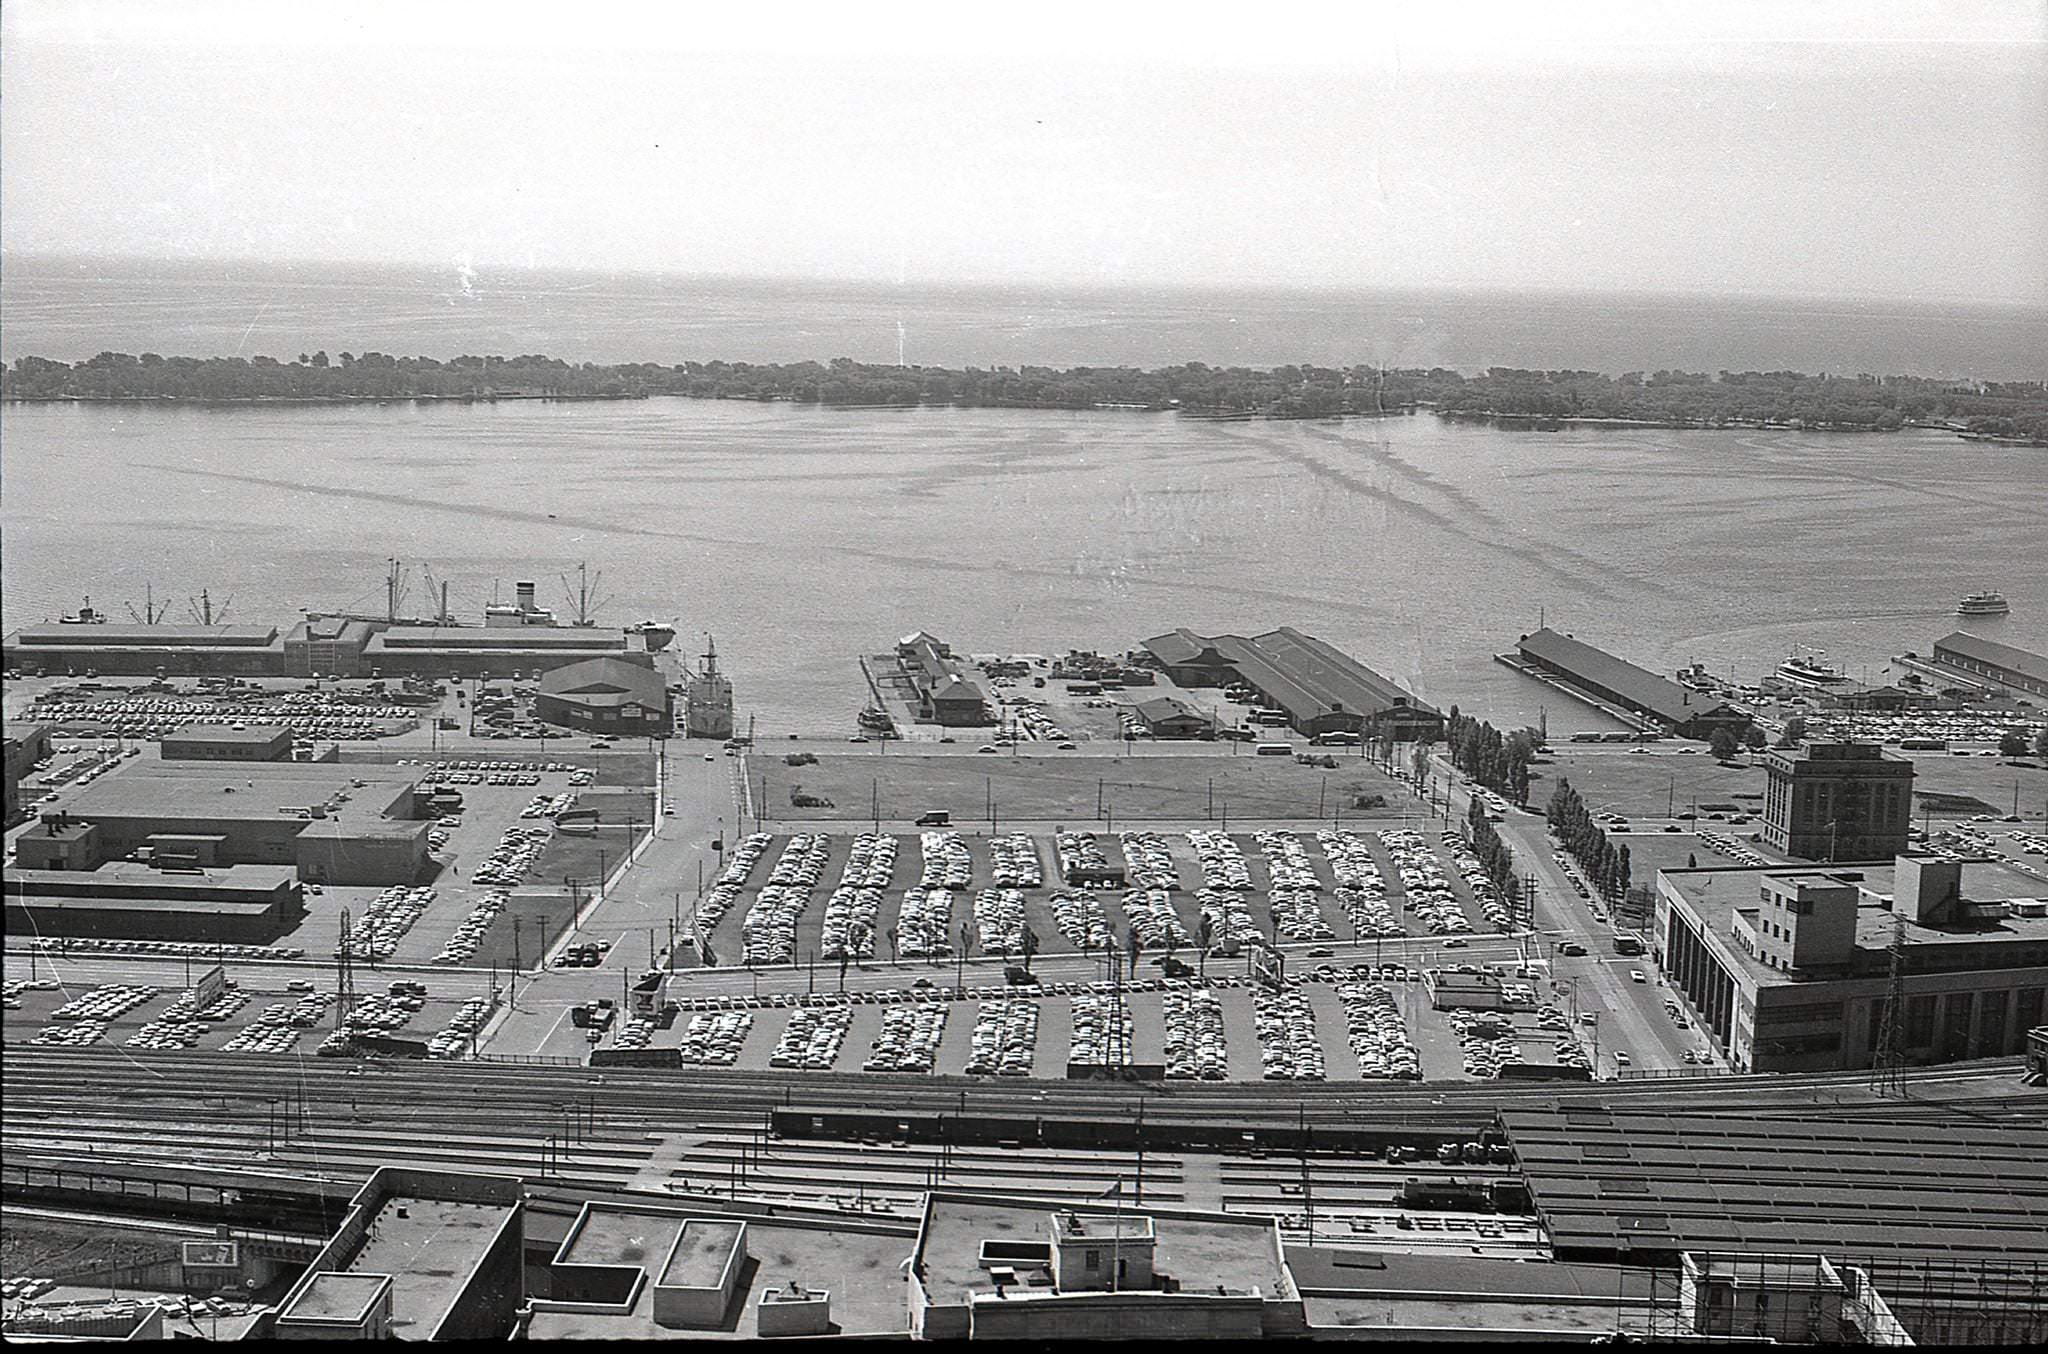 A view looking south from the Bank of Commerce building, 1959.